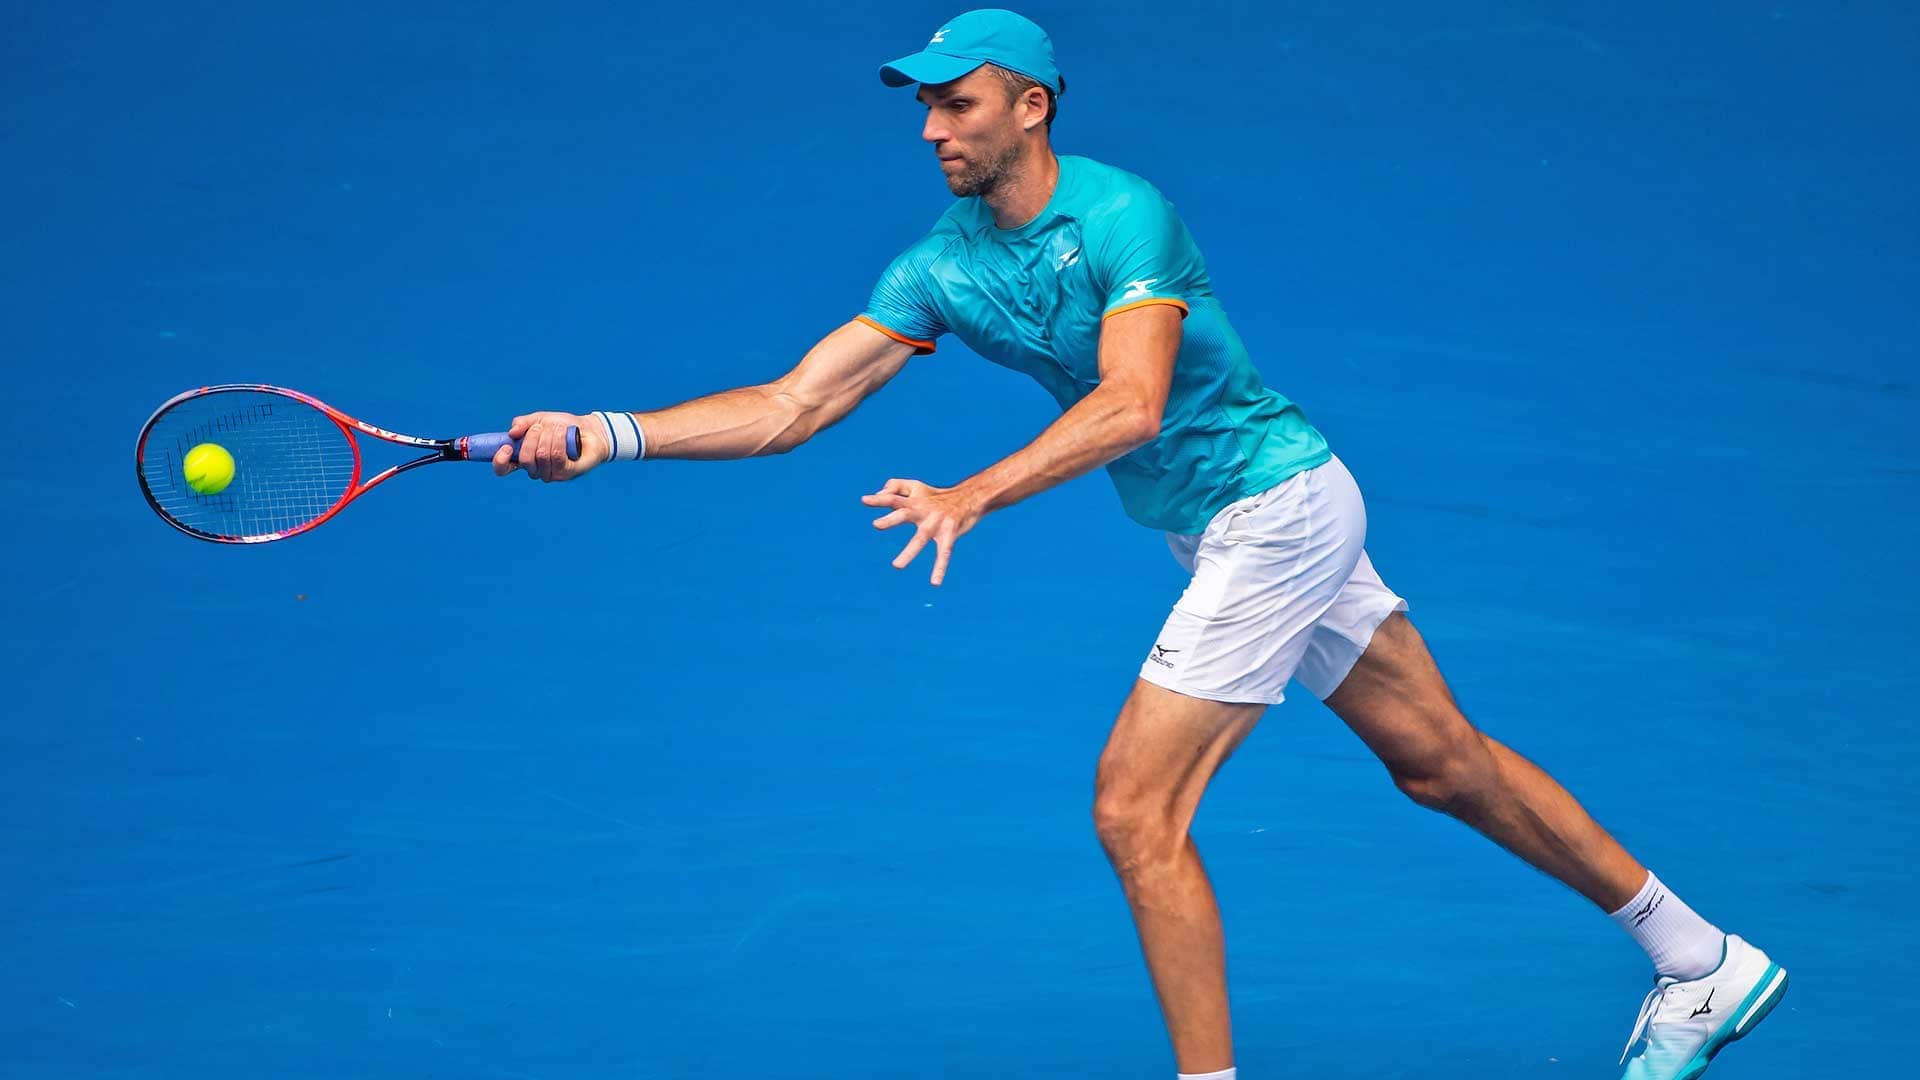 Ivo Karlovic hits a forehand at the 2019 Australian Open.